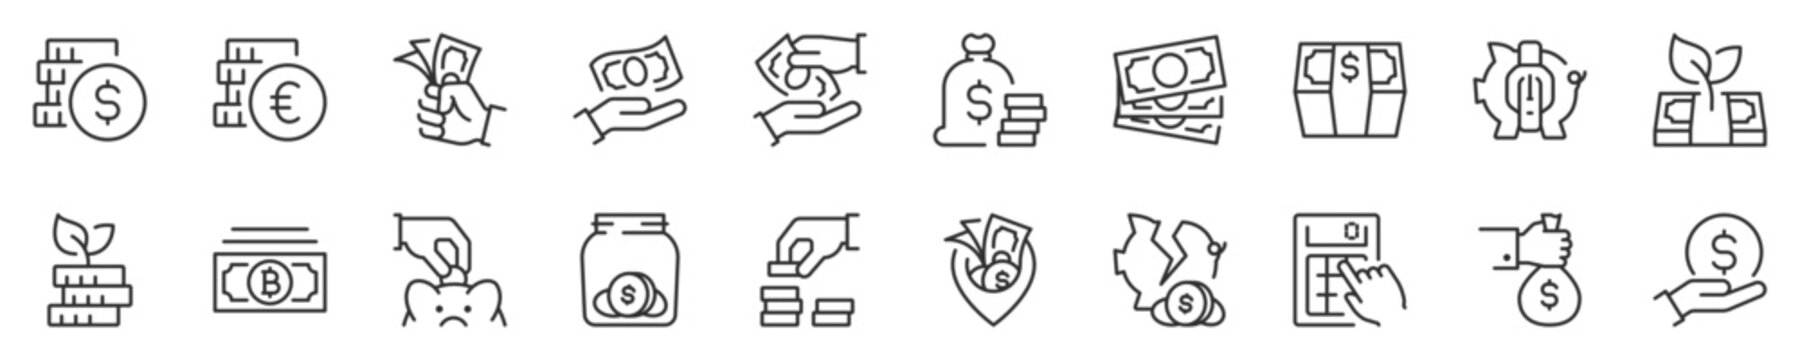 money, coins and finances thin line icon set 3 of 3. symbol collection in transparent background. ed